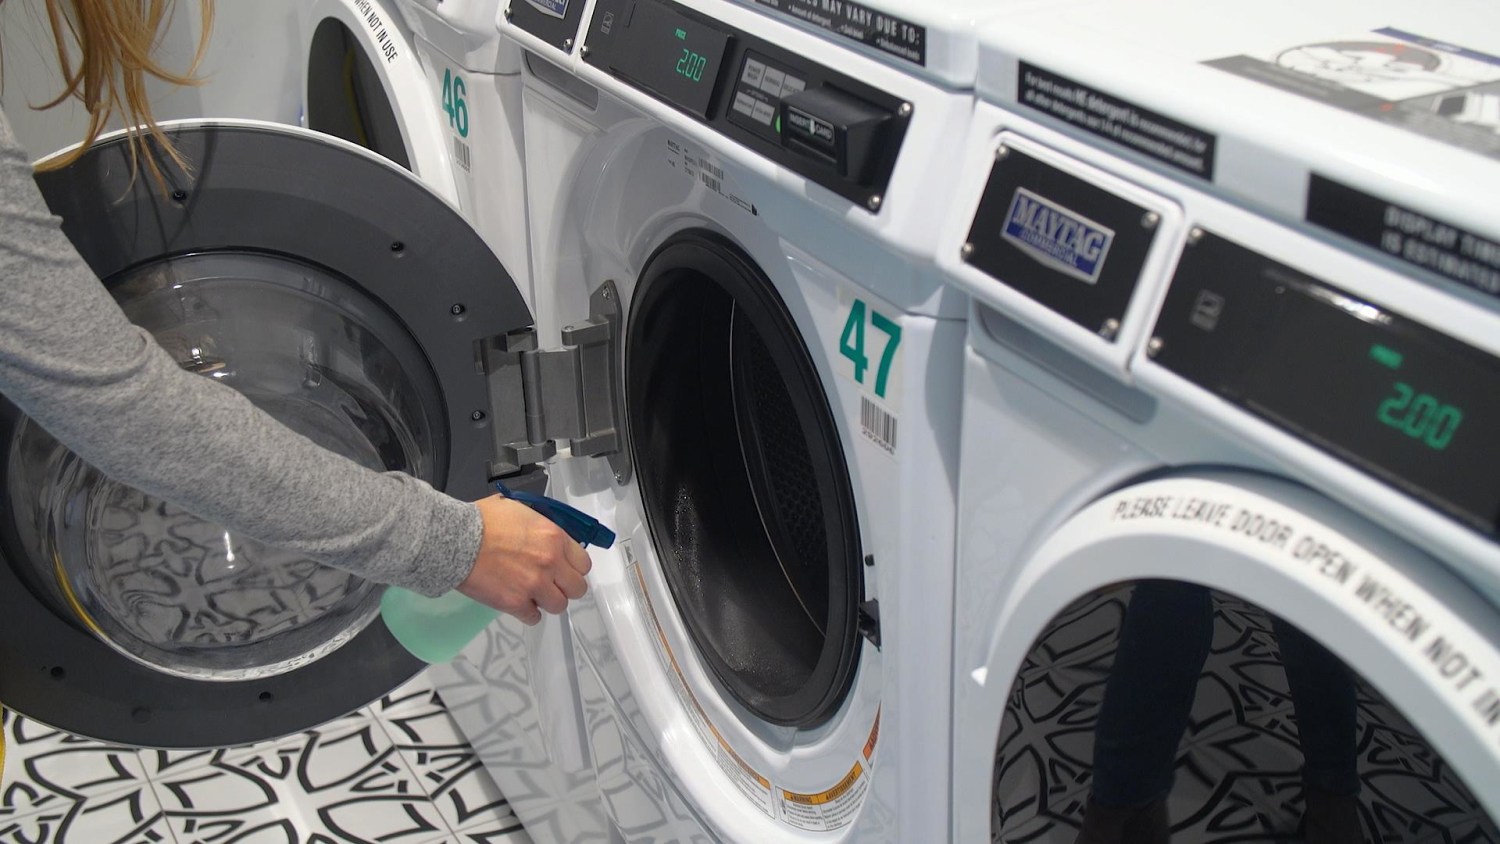 How To Clean Your Washing Machine - Washing Machine Cleaning Tips